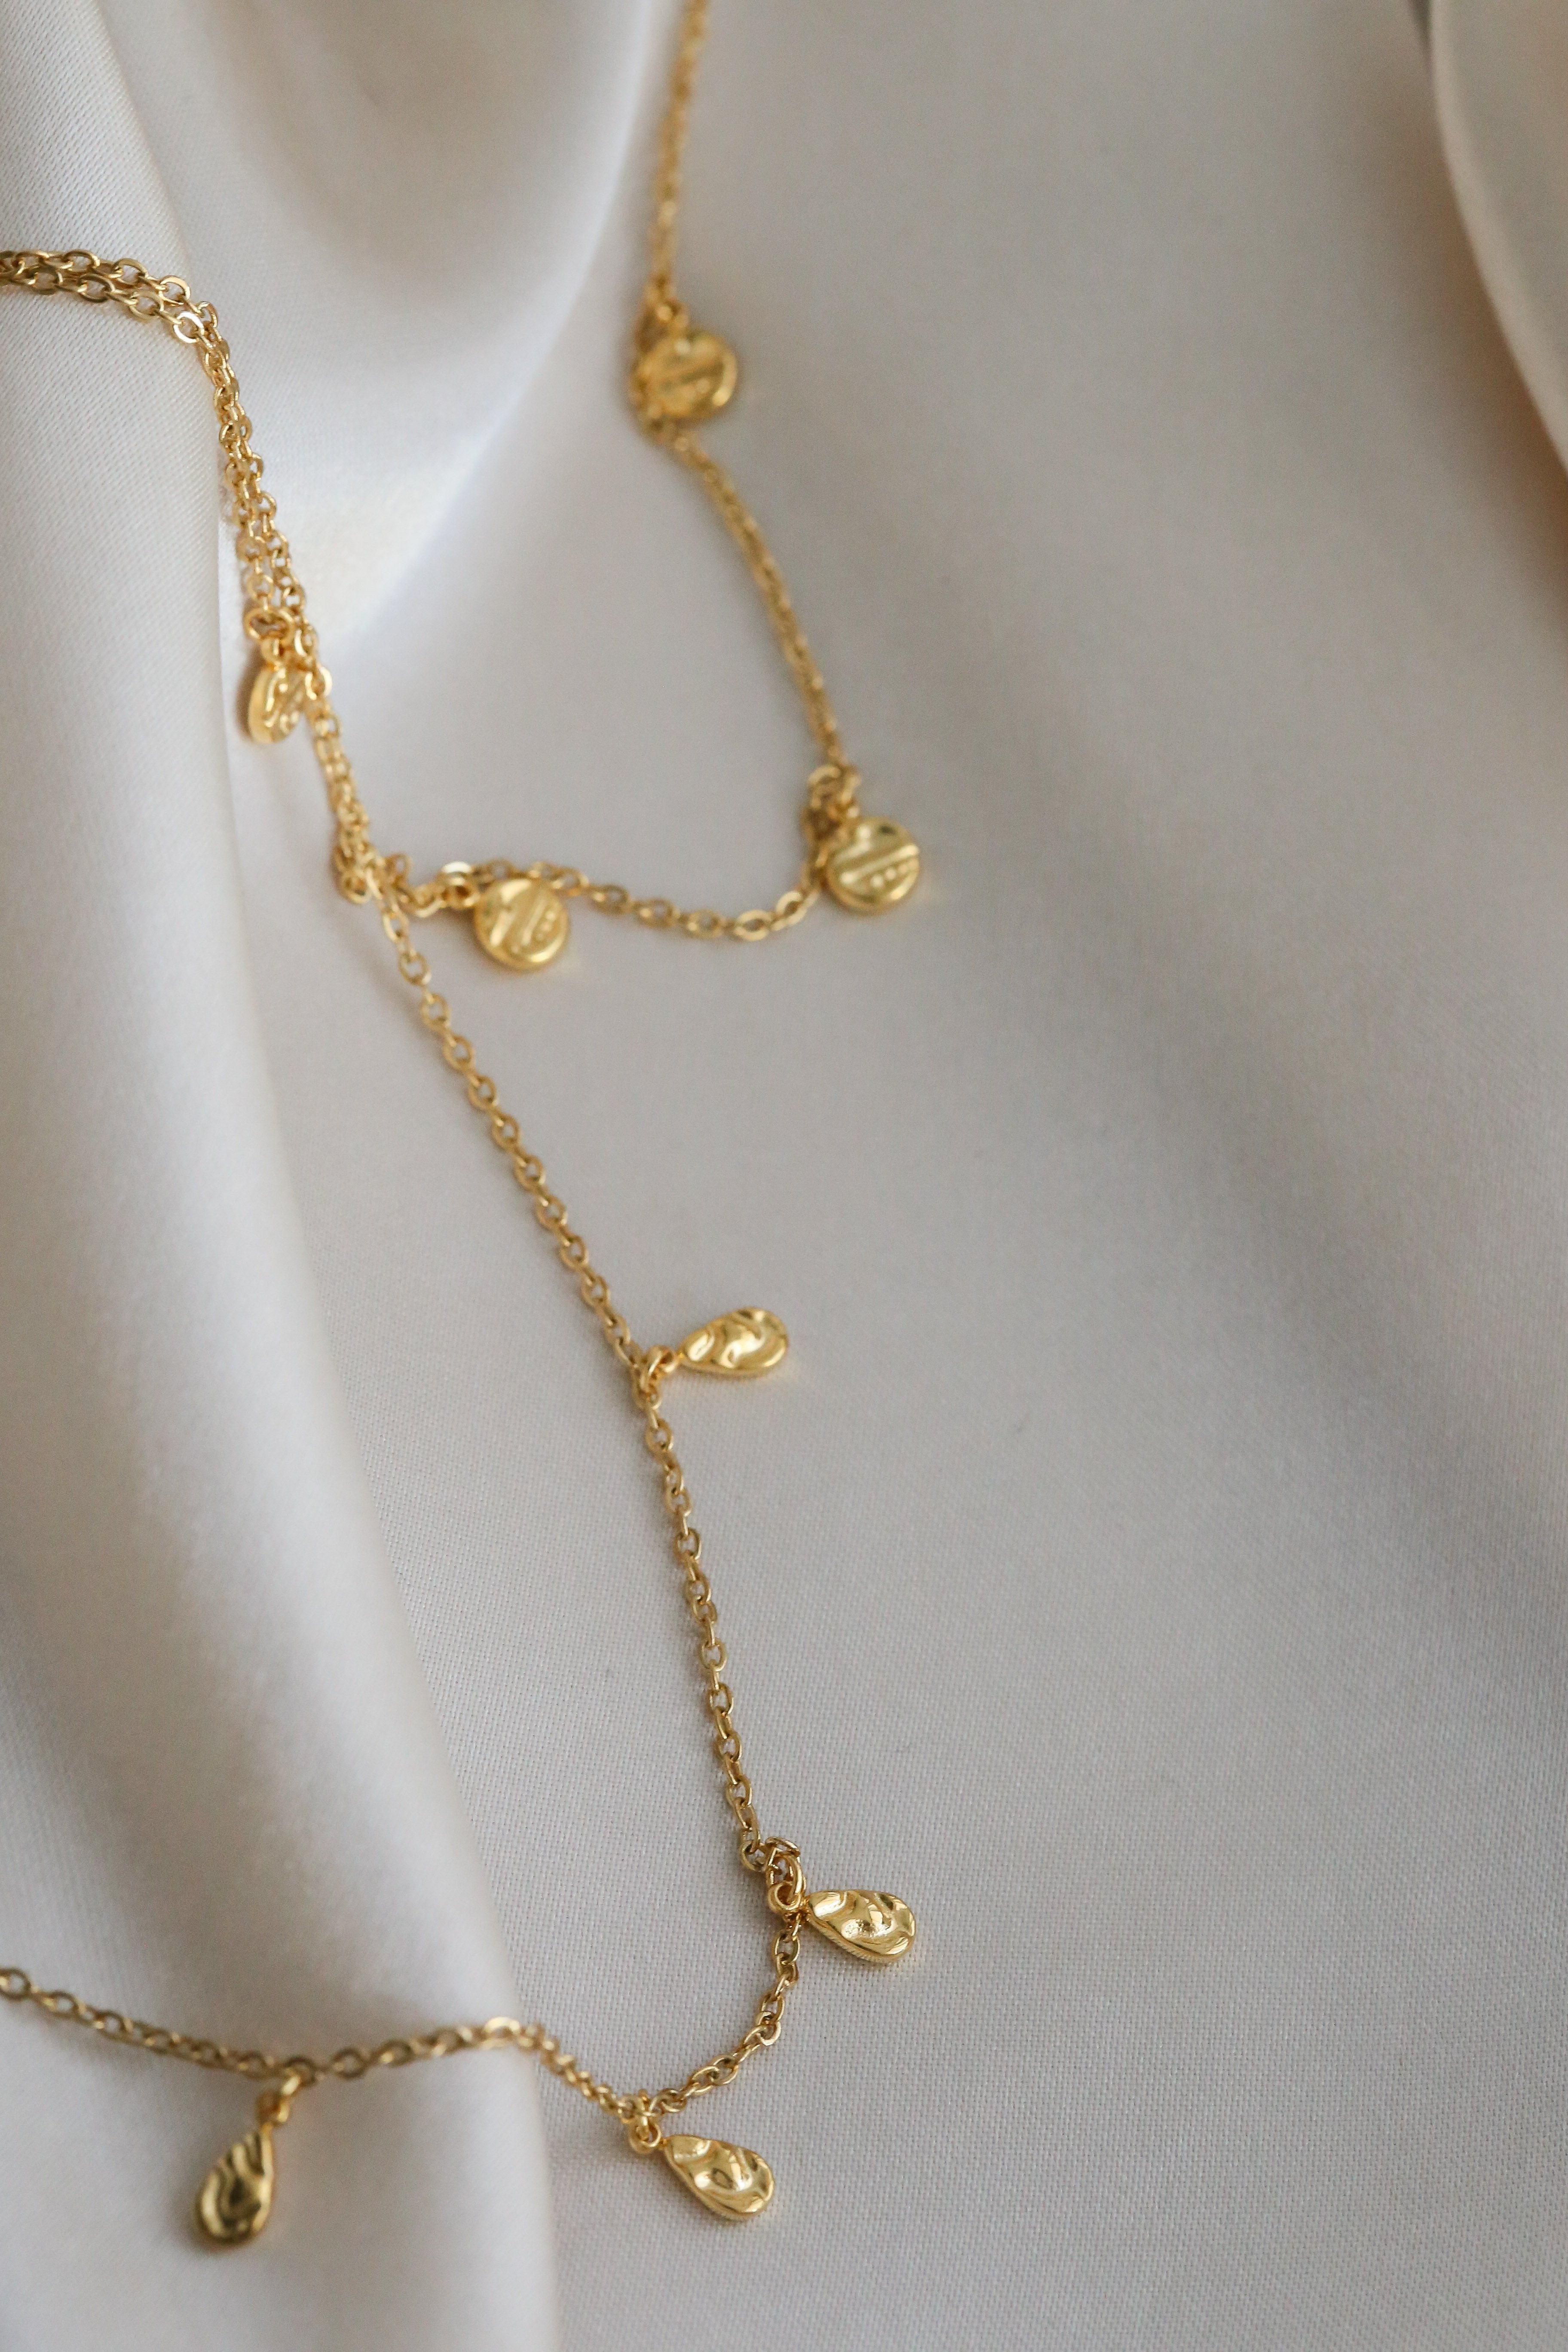 Althea Necklace - Boutique Minimaliste has waterproof, durable, elegant and vintage inspired jewelry